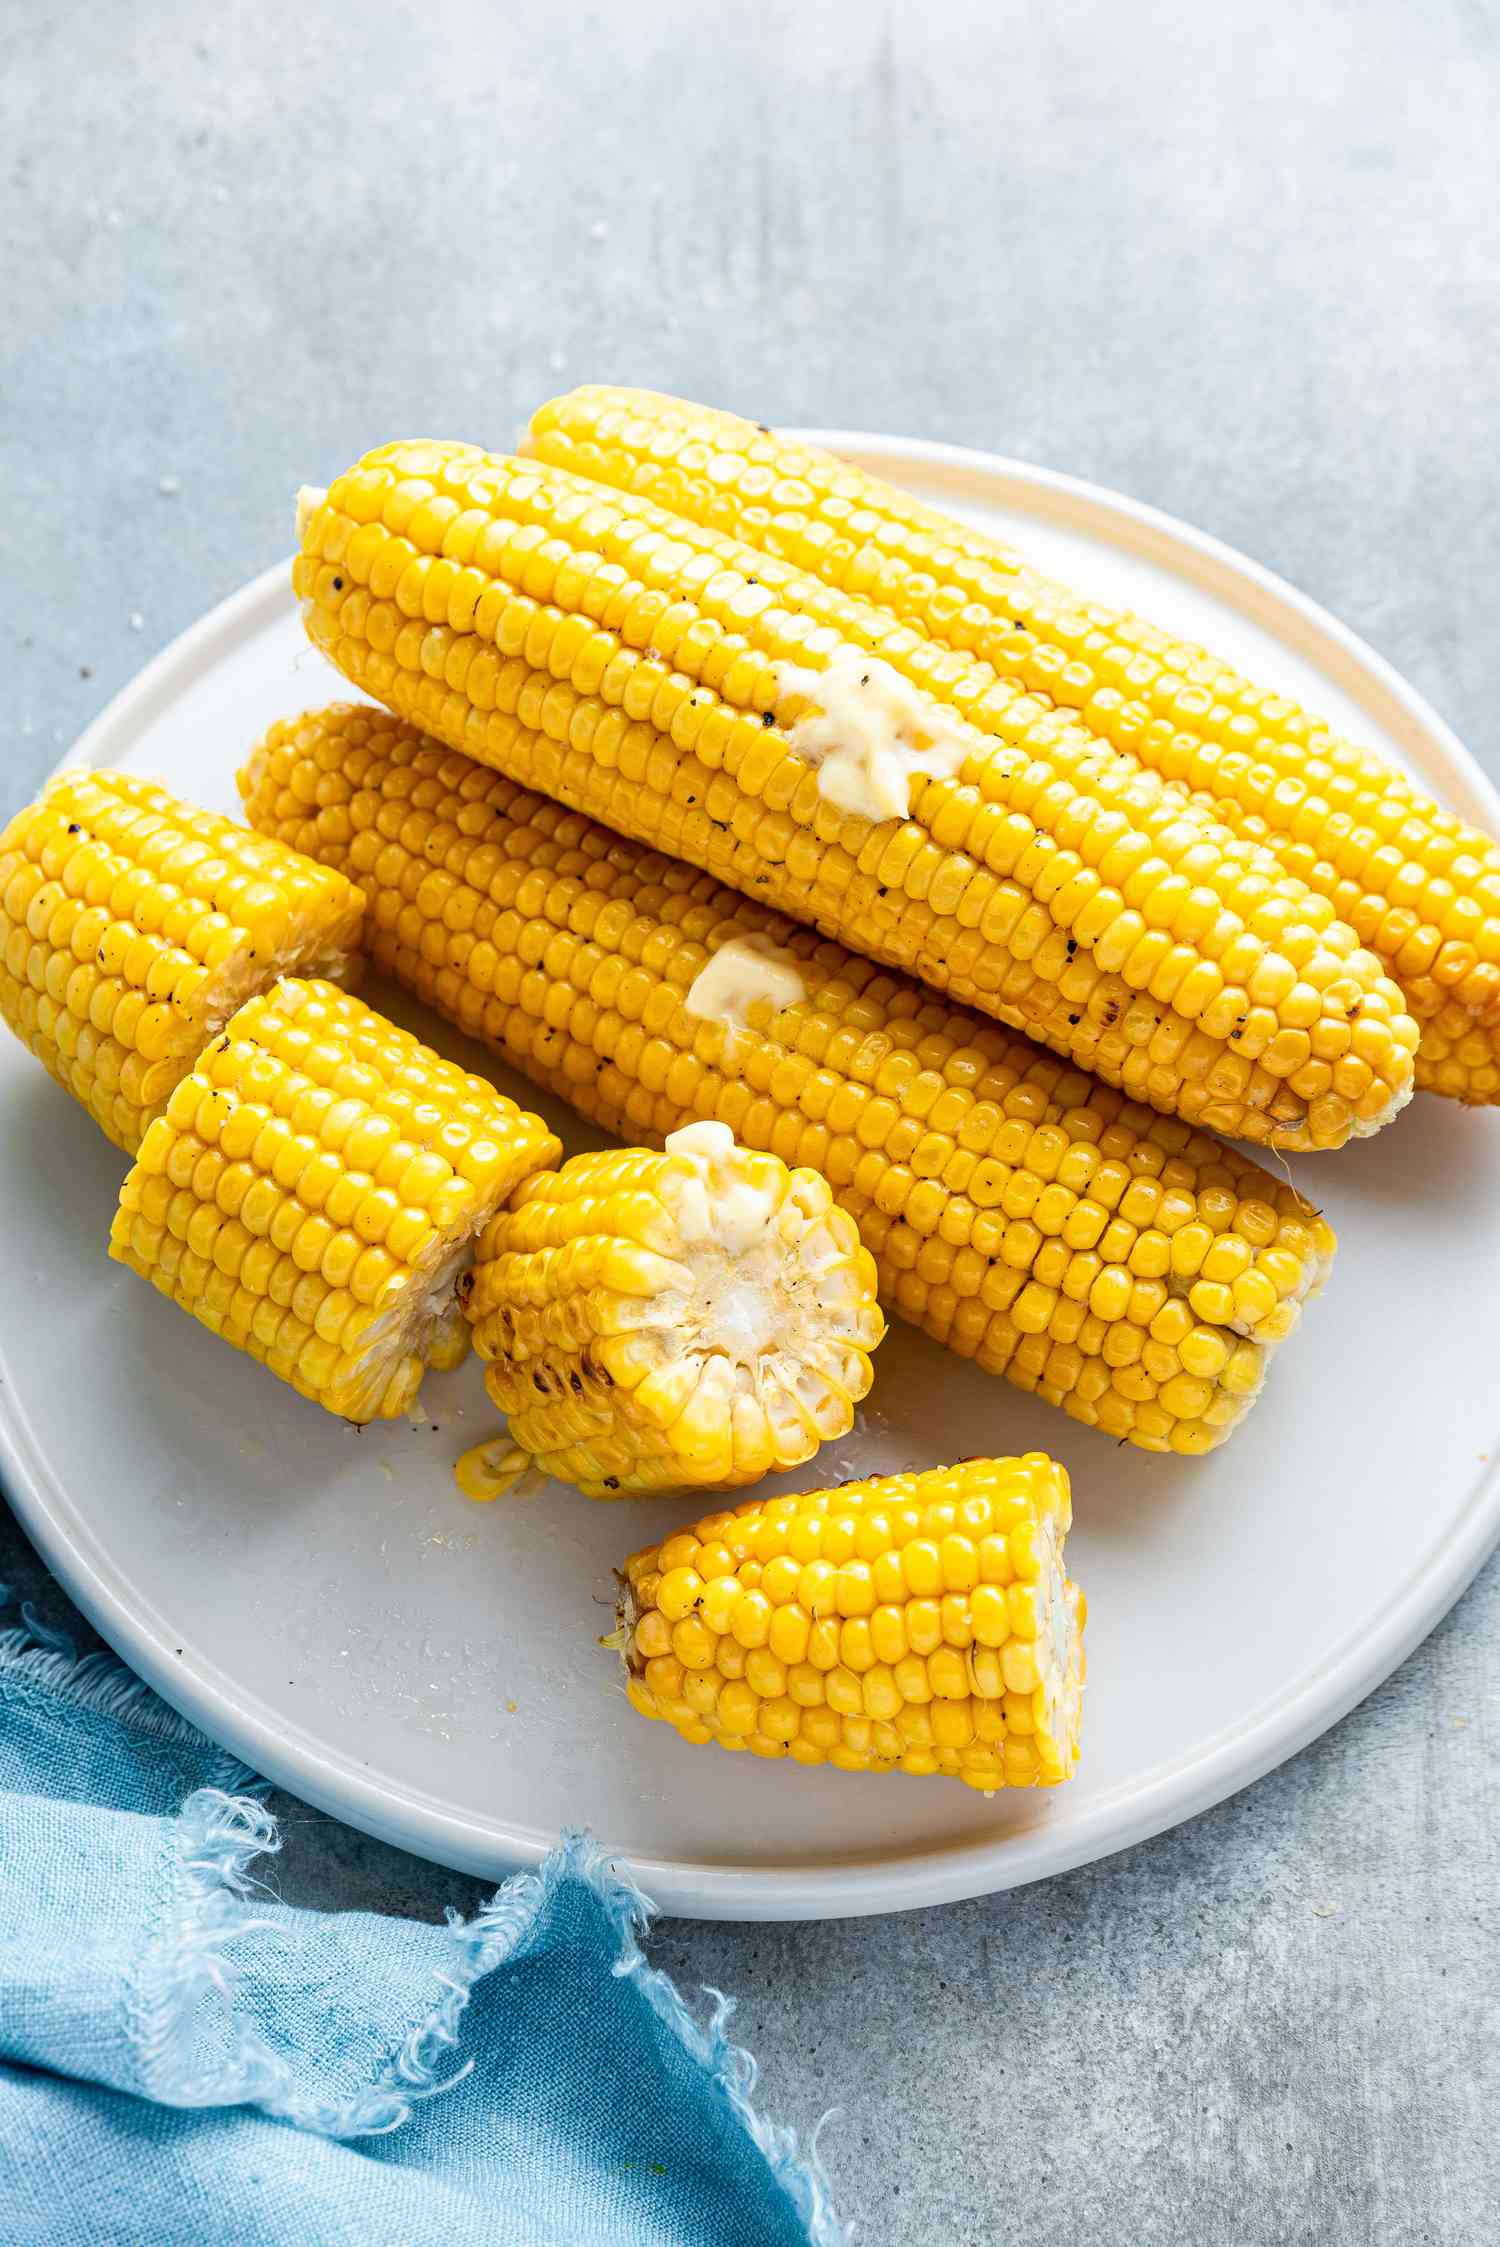 Best of Corn on the cob images